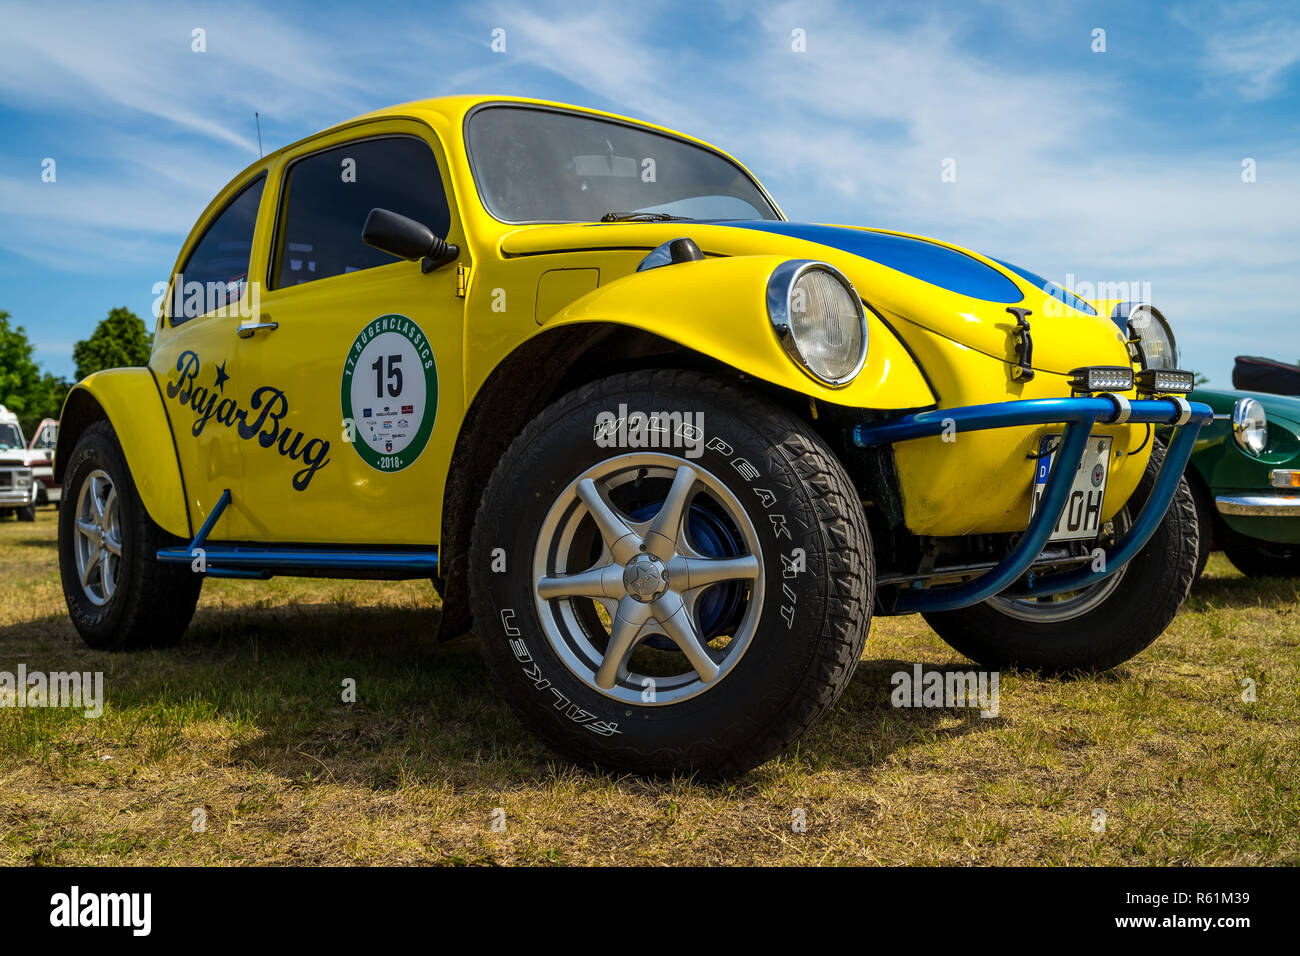 PAAREN IM GLIEN, GERMANY - MAY 19, 2018: A Baja Bug is an original Volkswagen Beetle modified to operate off-road. Die Oldtimer Show 2018. Stock Photo